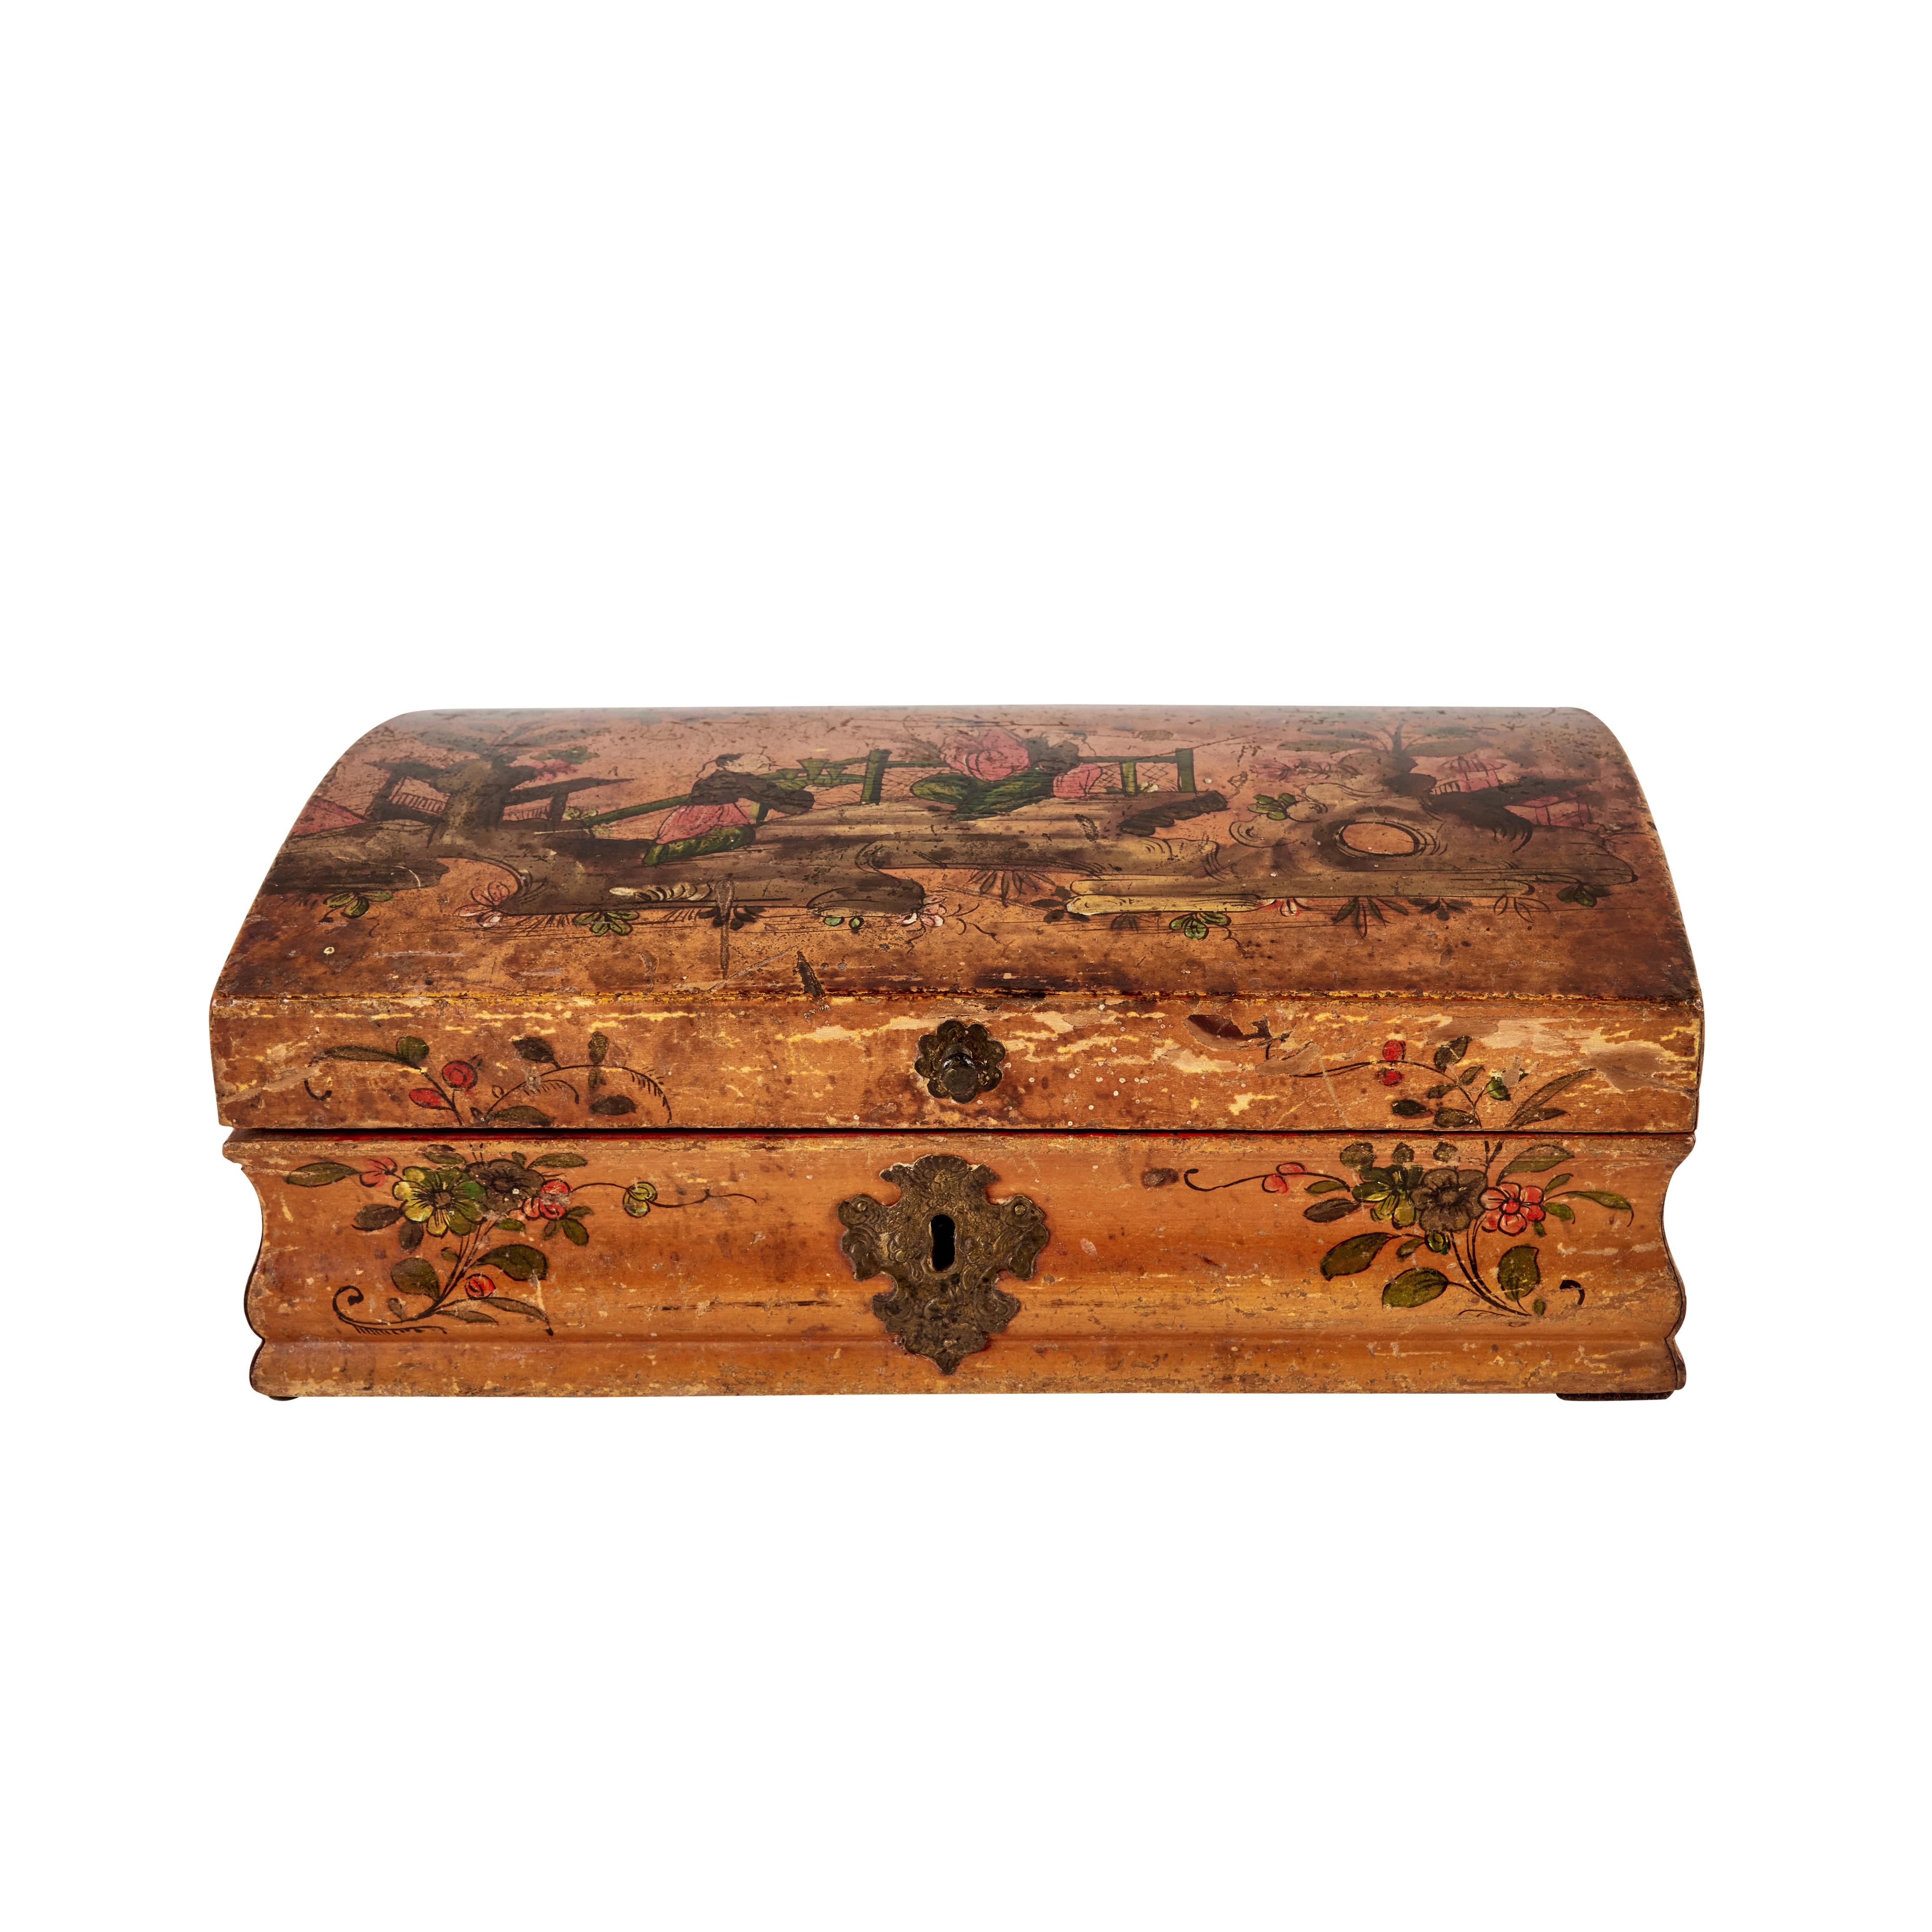 Hand-carved and painted, arched-top, Chinoiserie decorated hinged wig box with original bronze hardware. The top featuring a trio of figures in a lush landscape of blossoming trees.